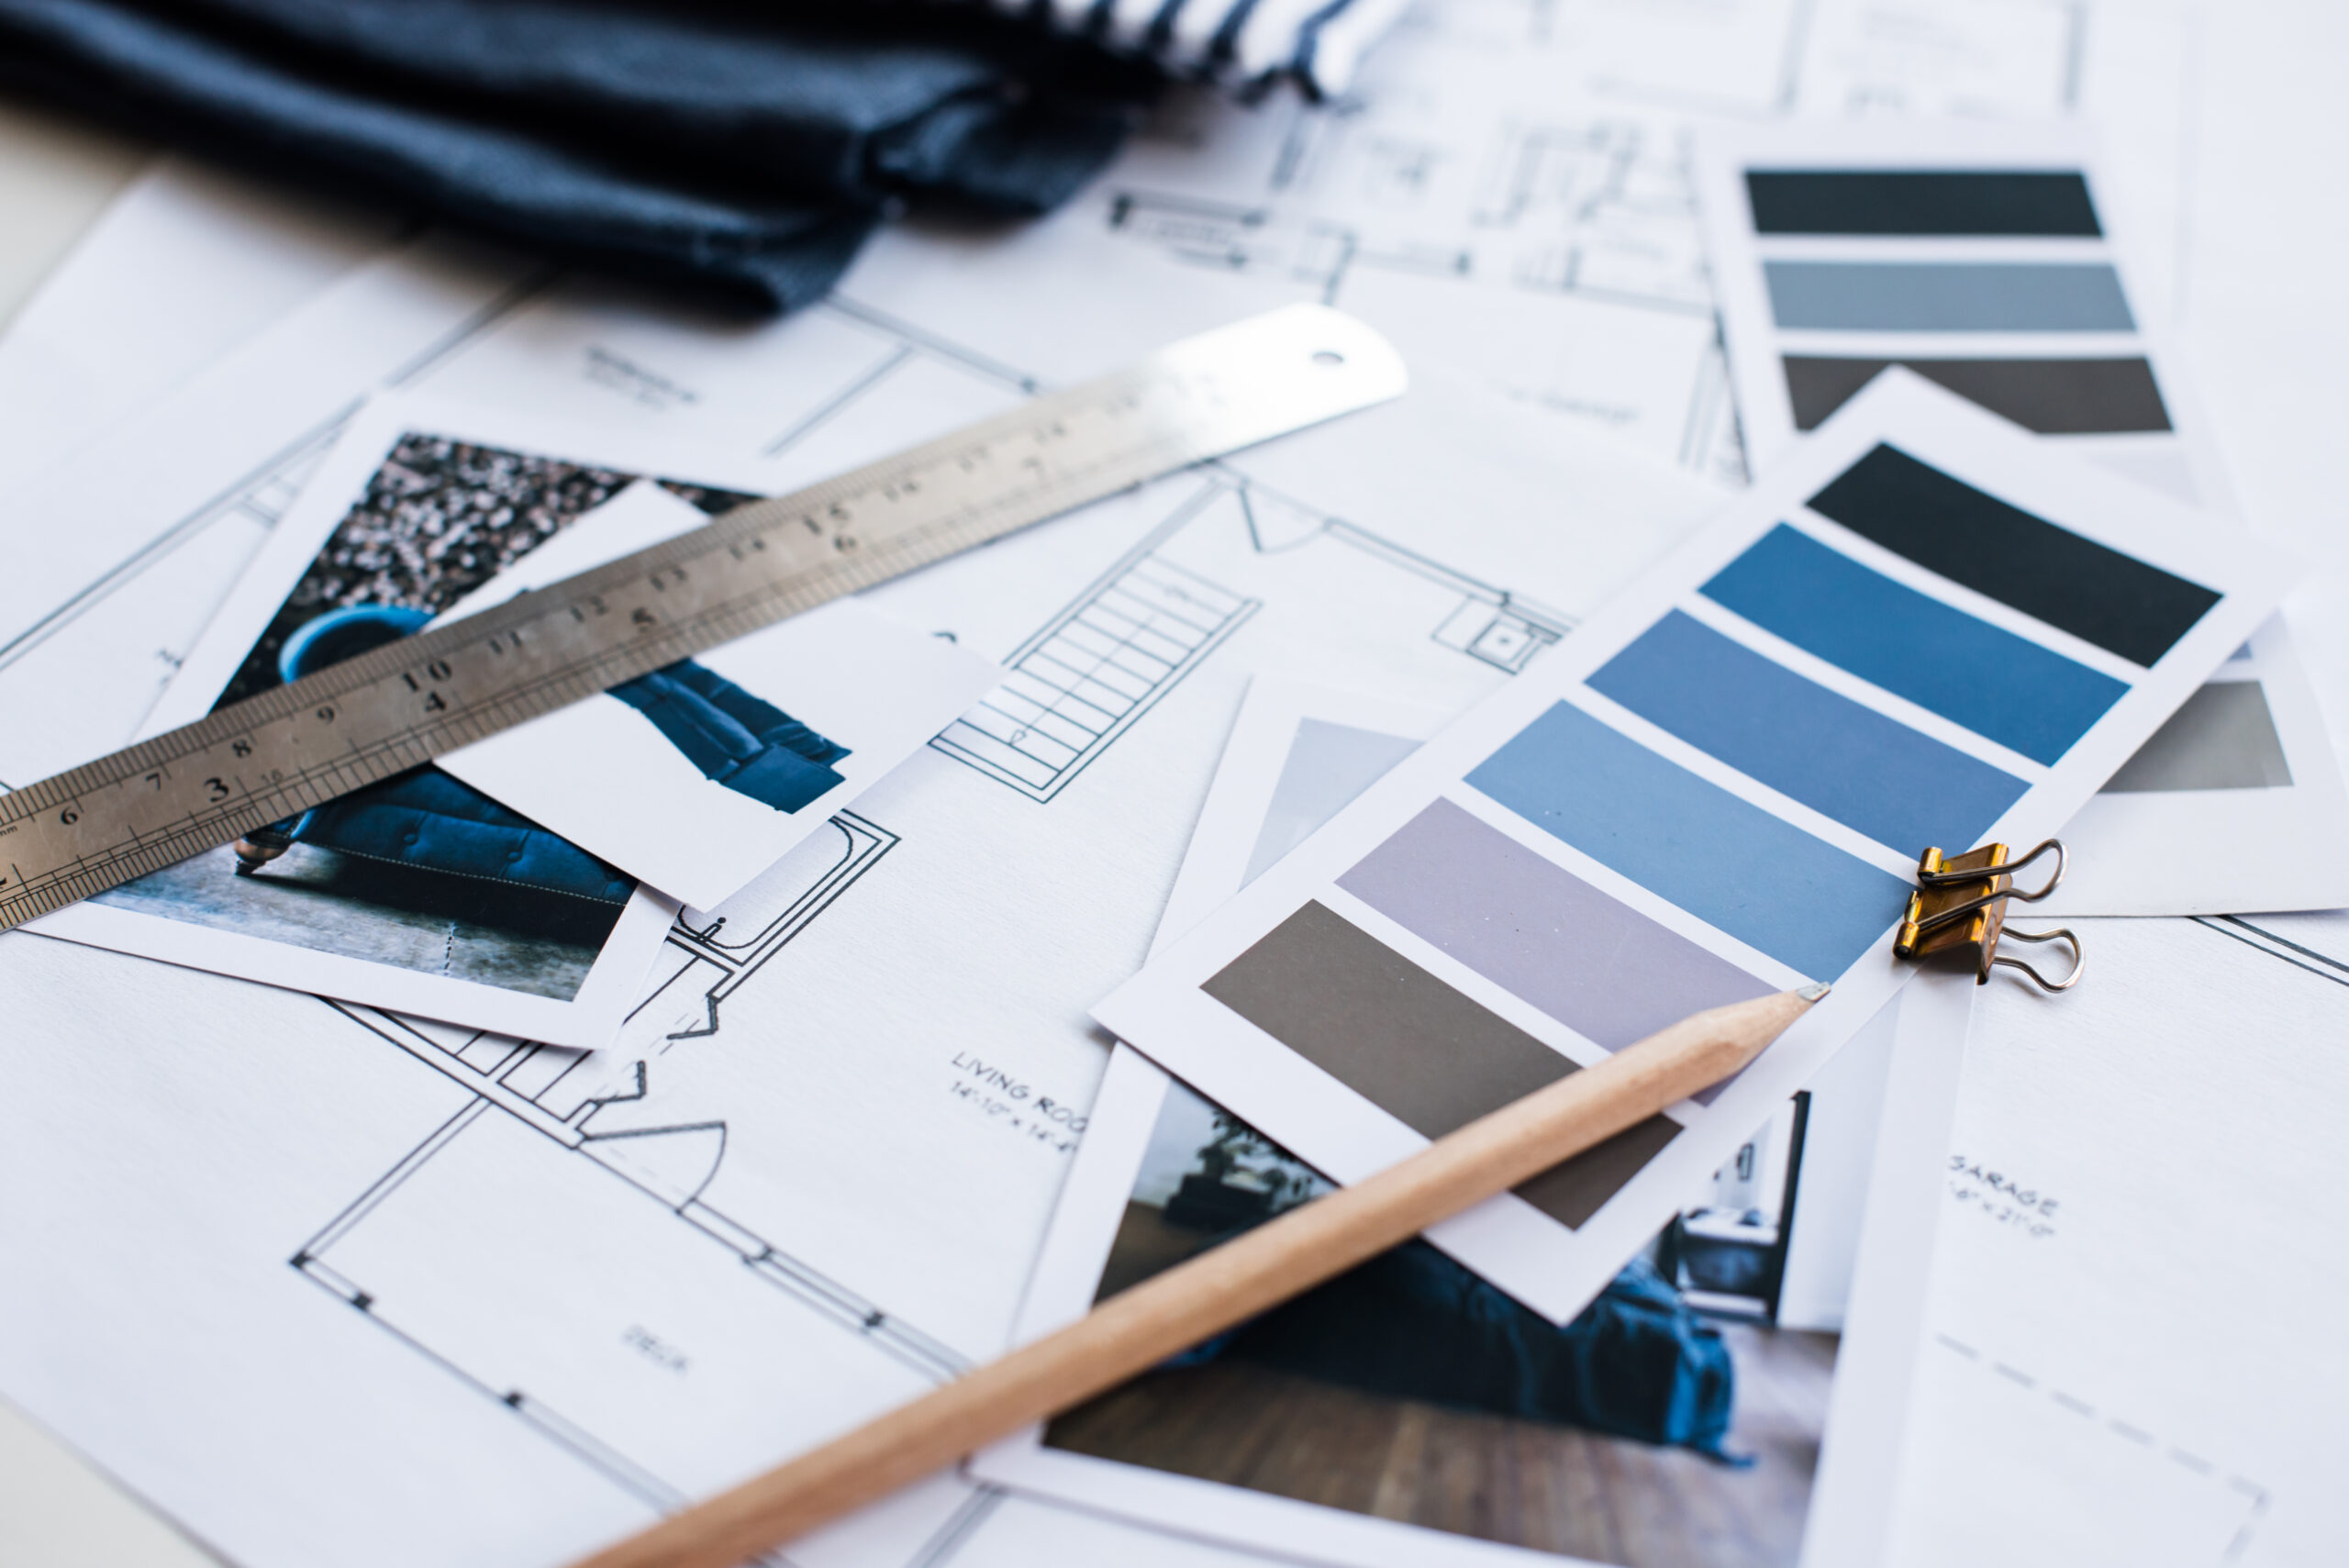 Interior designer's working table, an architectural plan of the house, a color palette, furniture and fabric samples in blue color. Drawings and plans for house decoration.